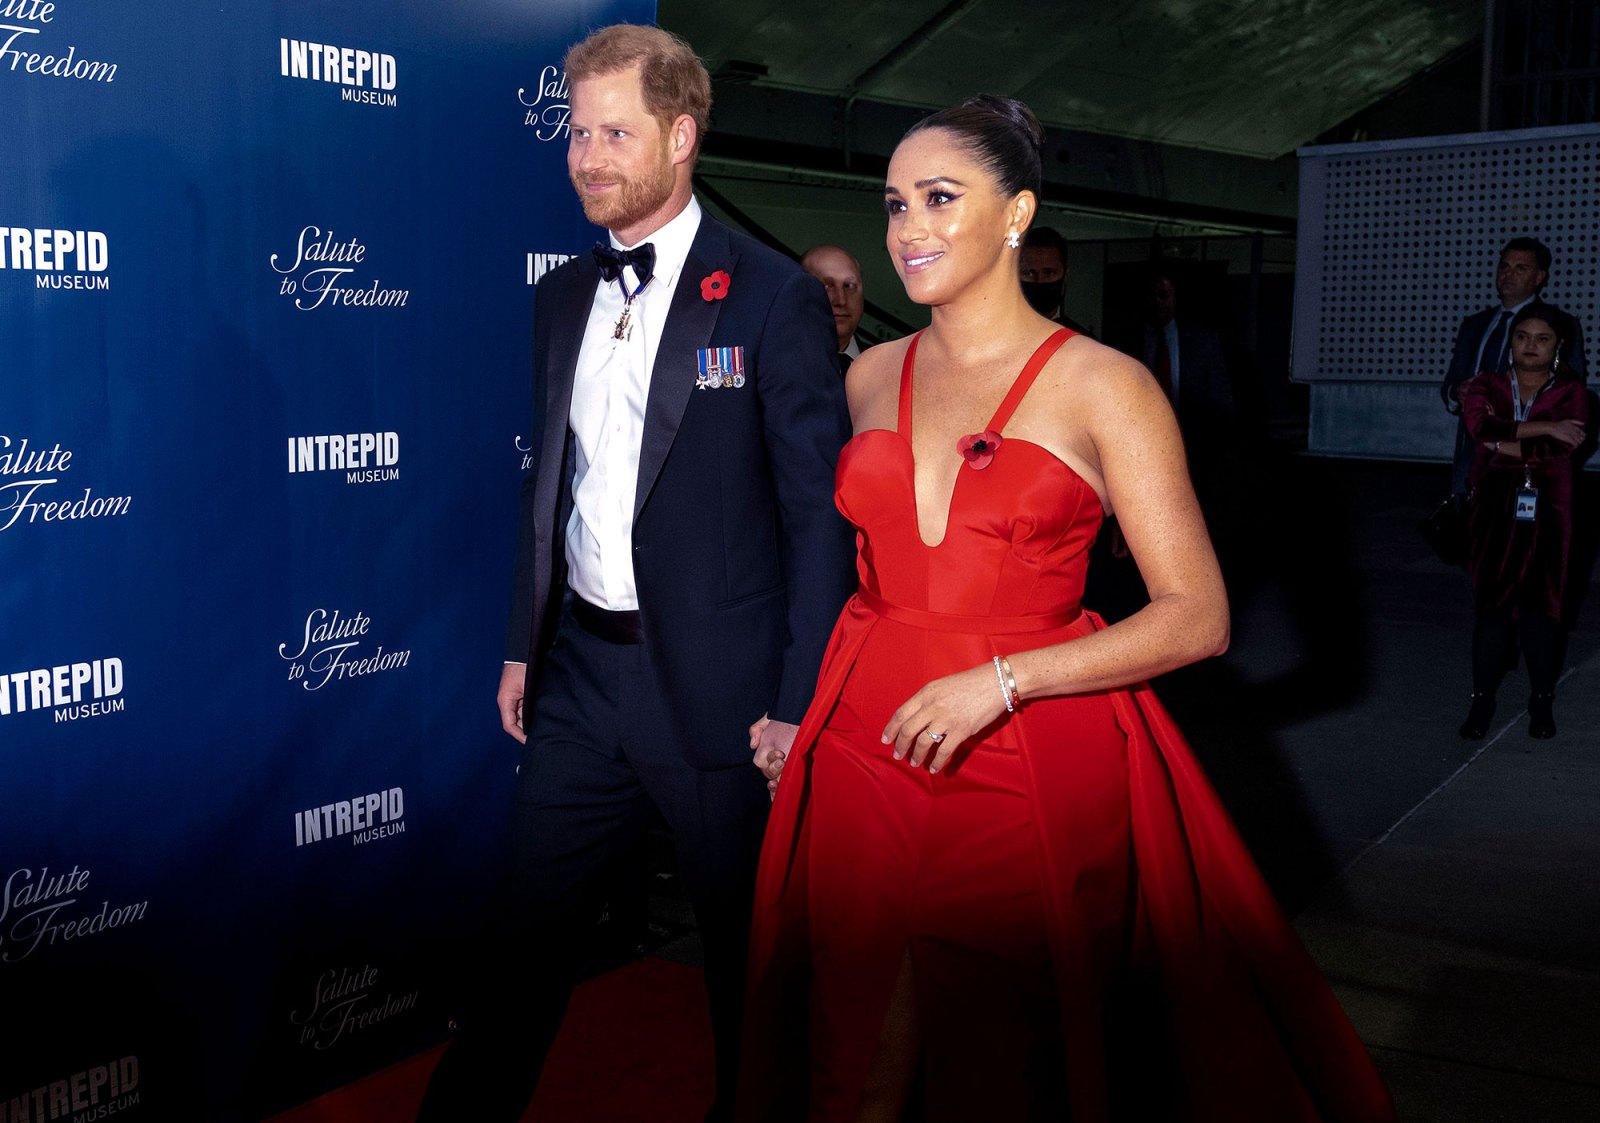 Prince Harry Gives Personal Speech With Meghan Markle by His Side at NYC Gala